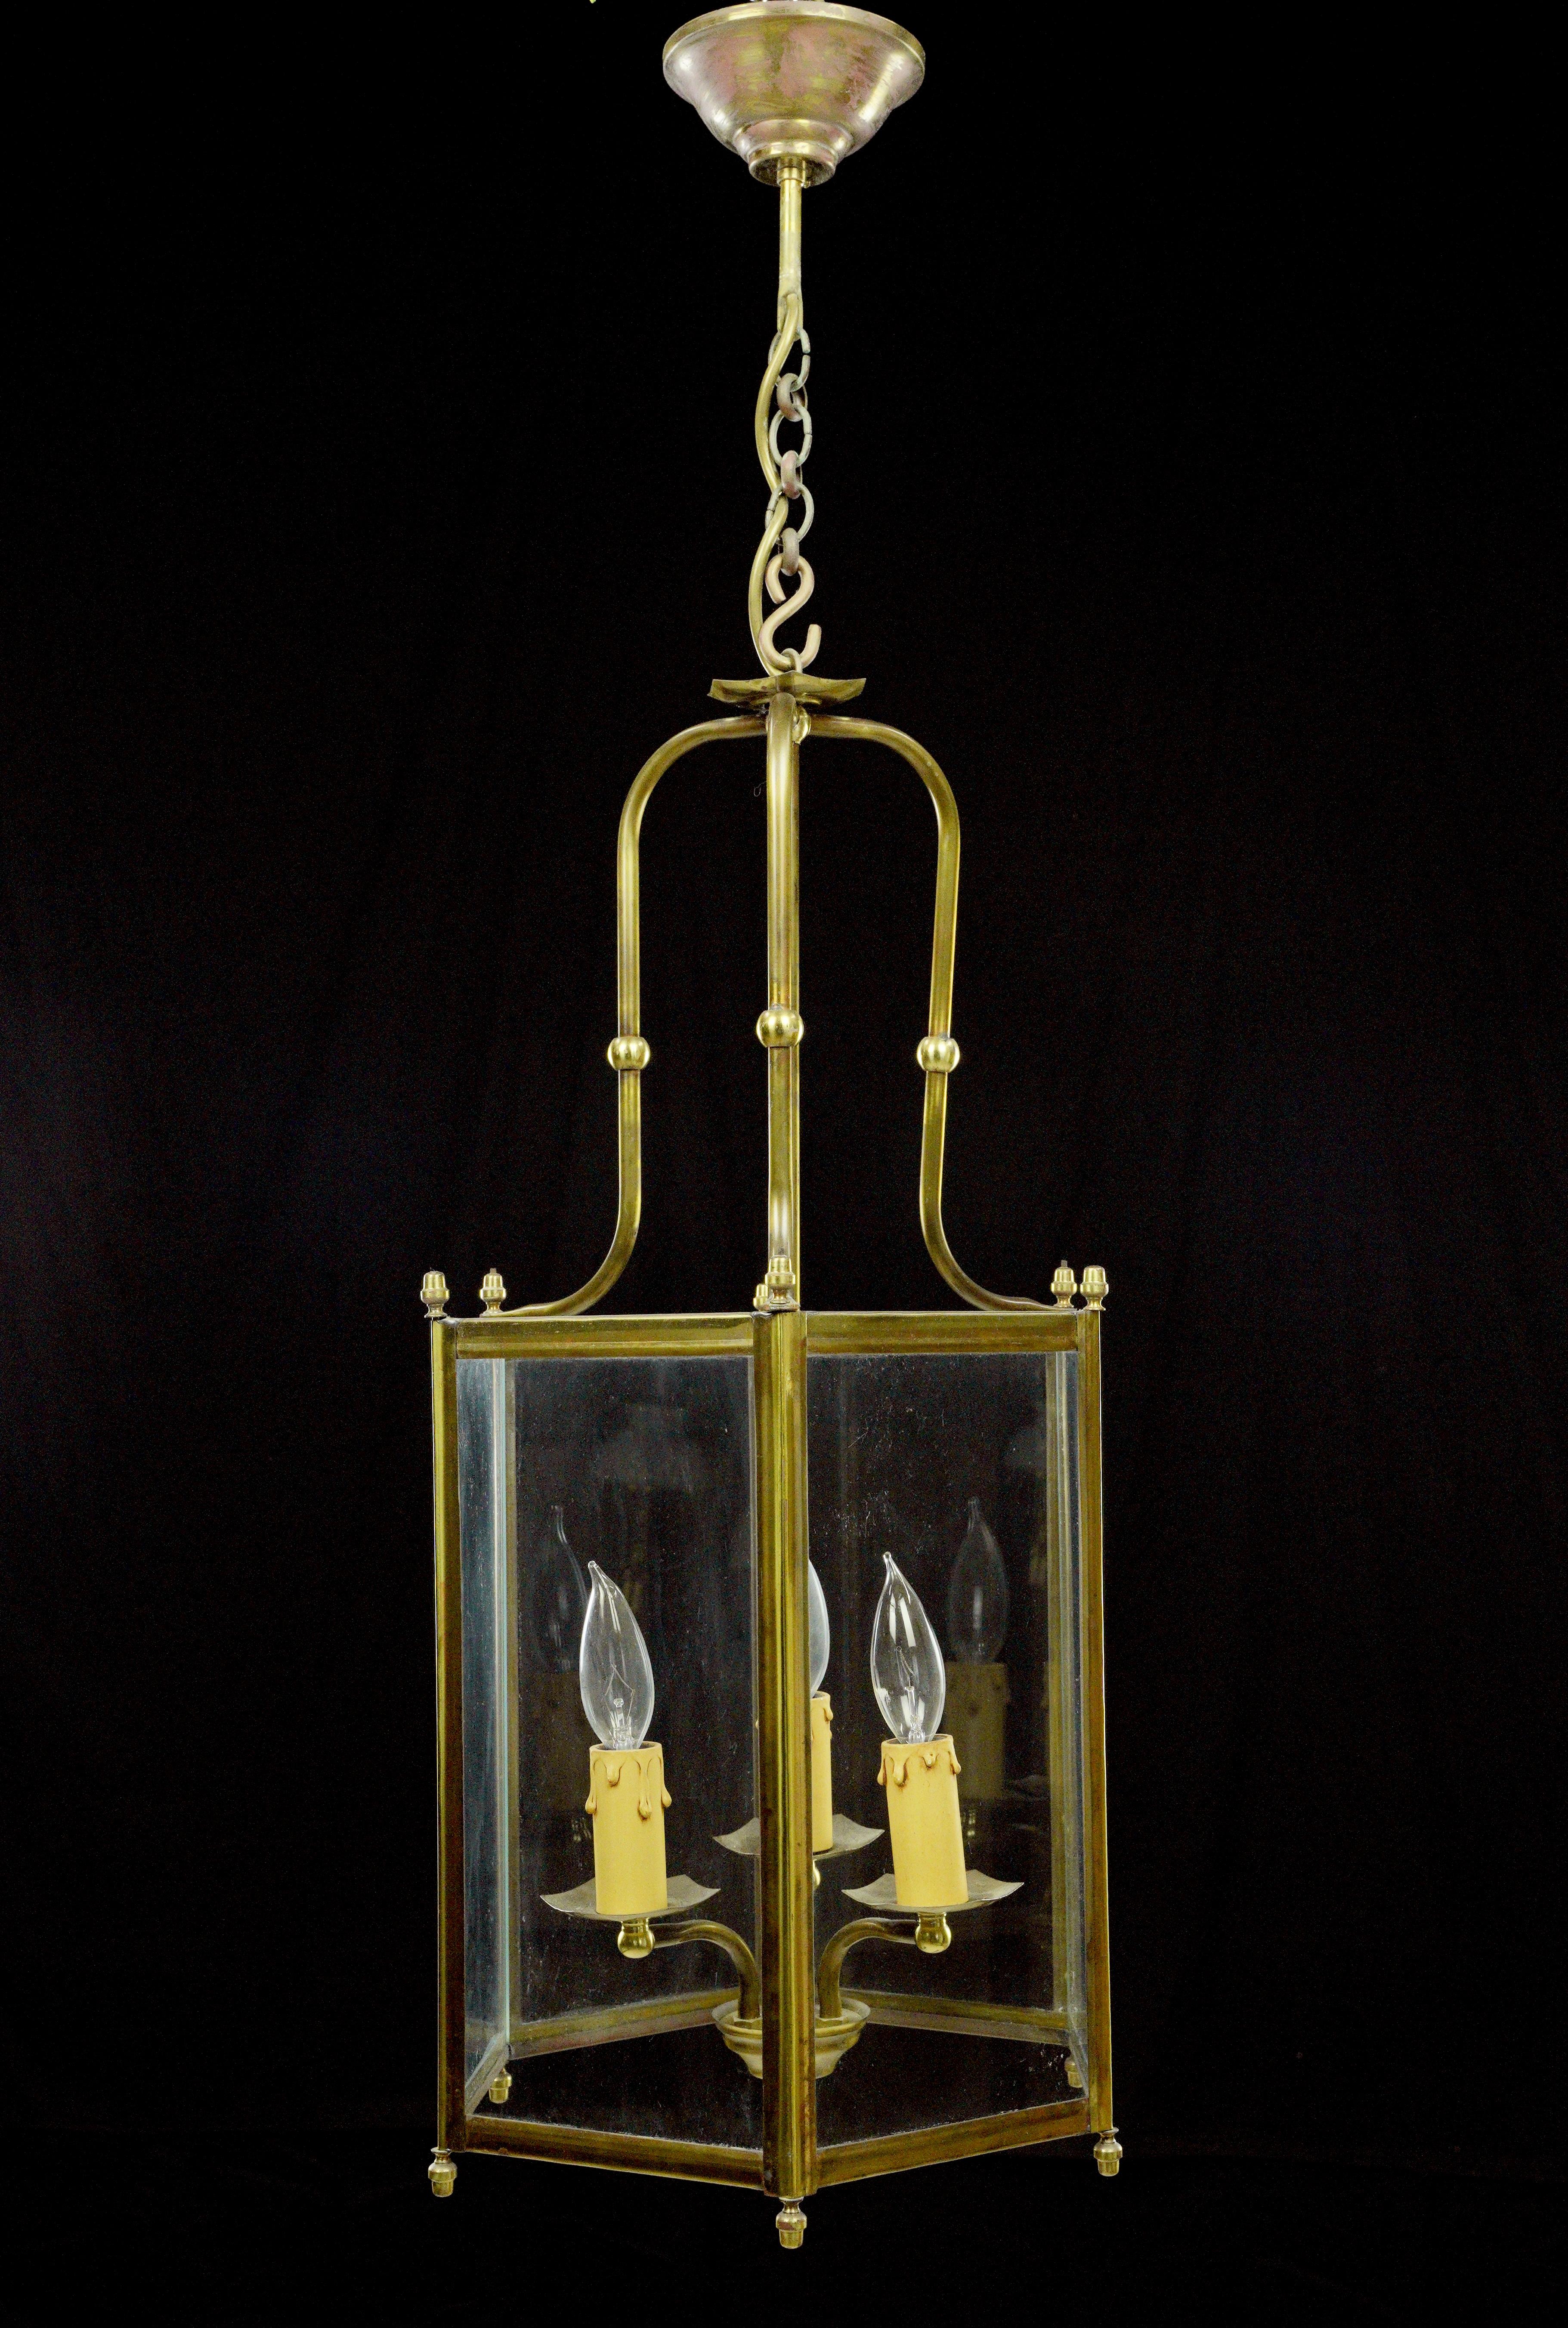 This Traditional pendant light features a hexagonal lantern design, made from brass and glass, with three arms. This piece was acquired from an estate located in Greenwich, Connecticut. The price includes restoration of cleaning and rewiring. This